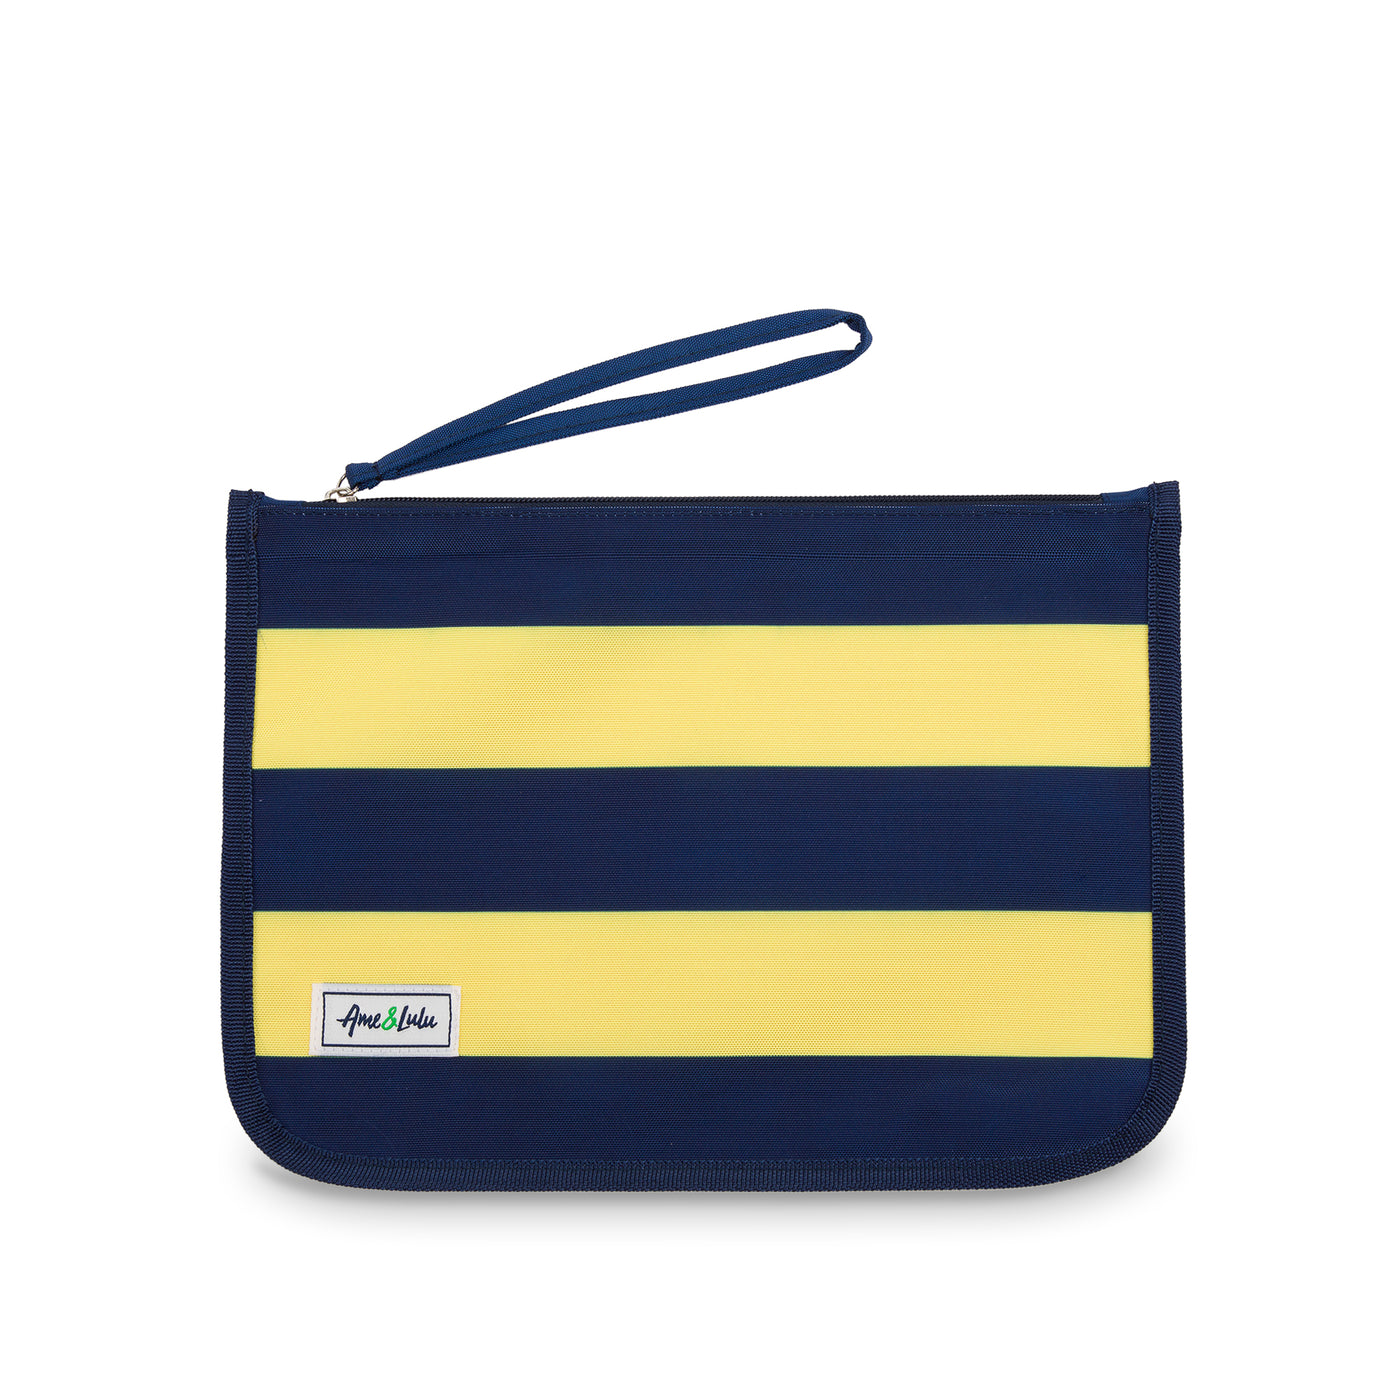 yellow and navy striped nylon zip pouch with wrist strap